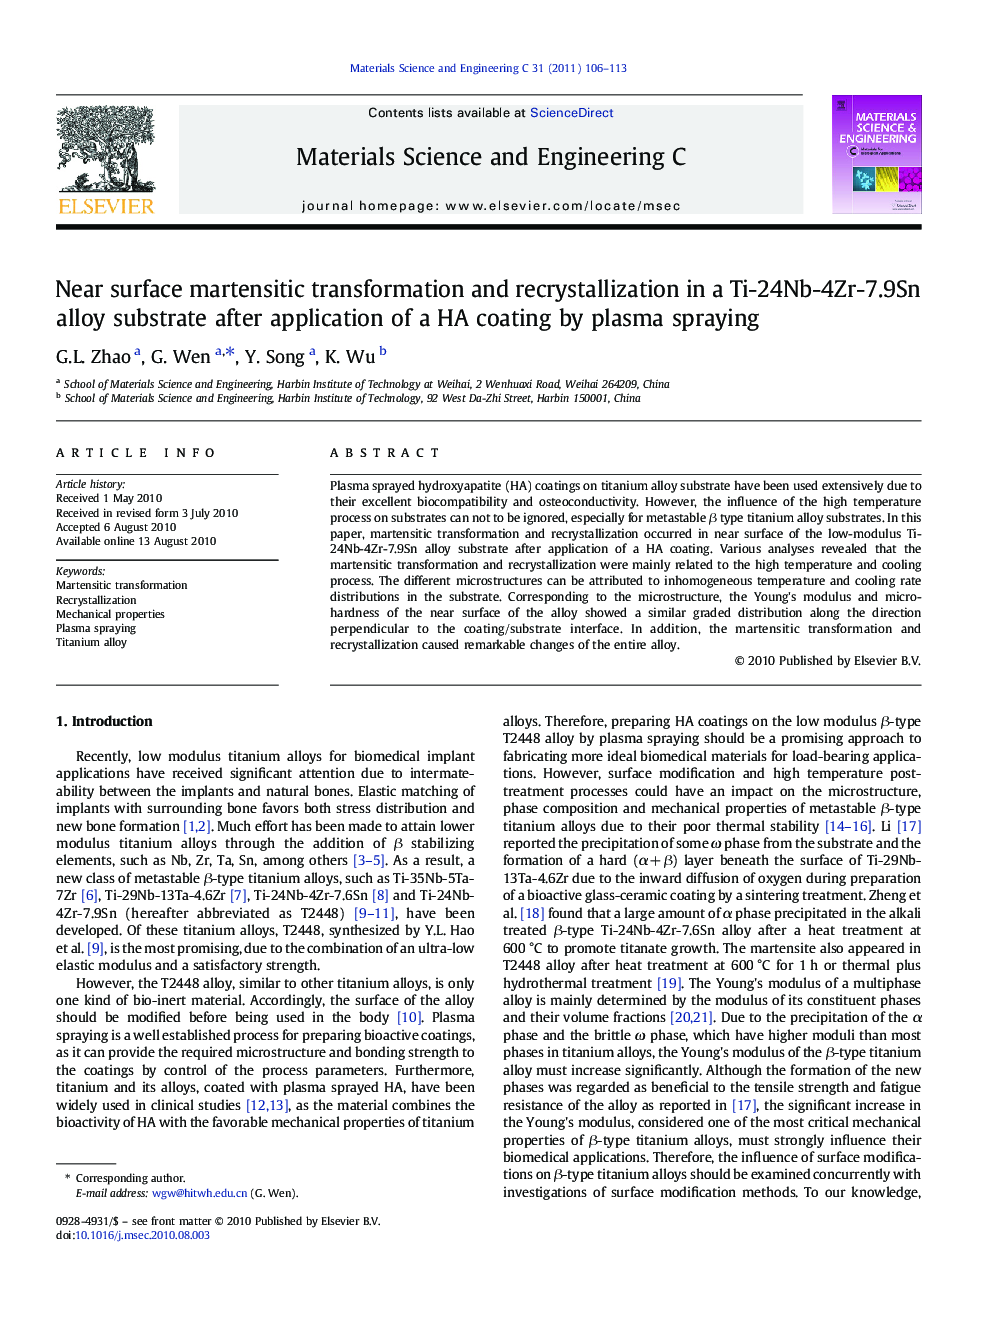 Near surface martensitic transformation and recrystallization in a Ti-24Nb-4Zr-7.9Sn alloy substrate after application of a HA coating by plasma spraying